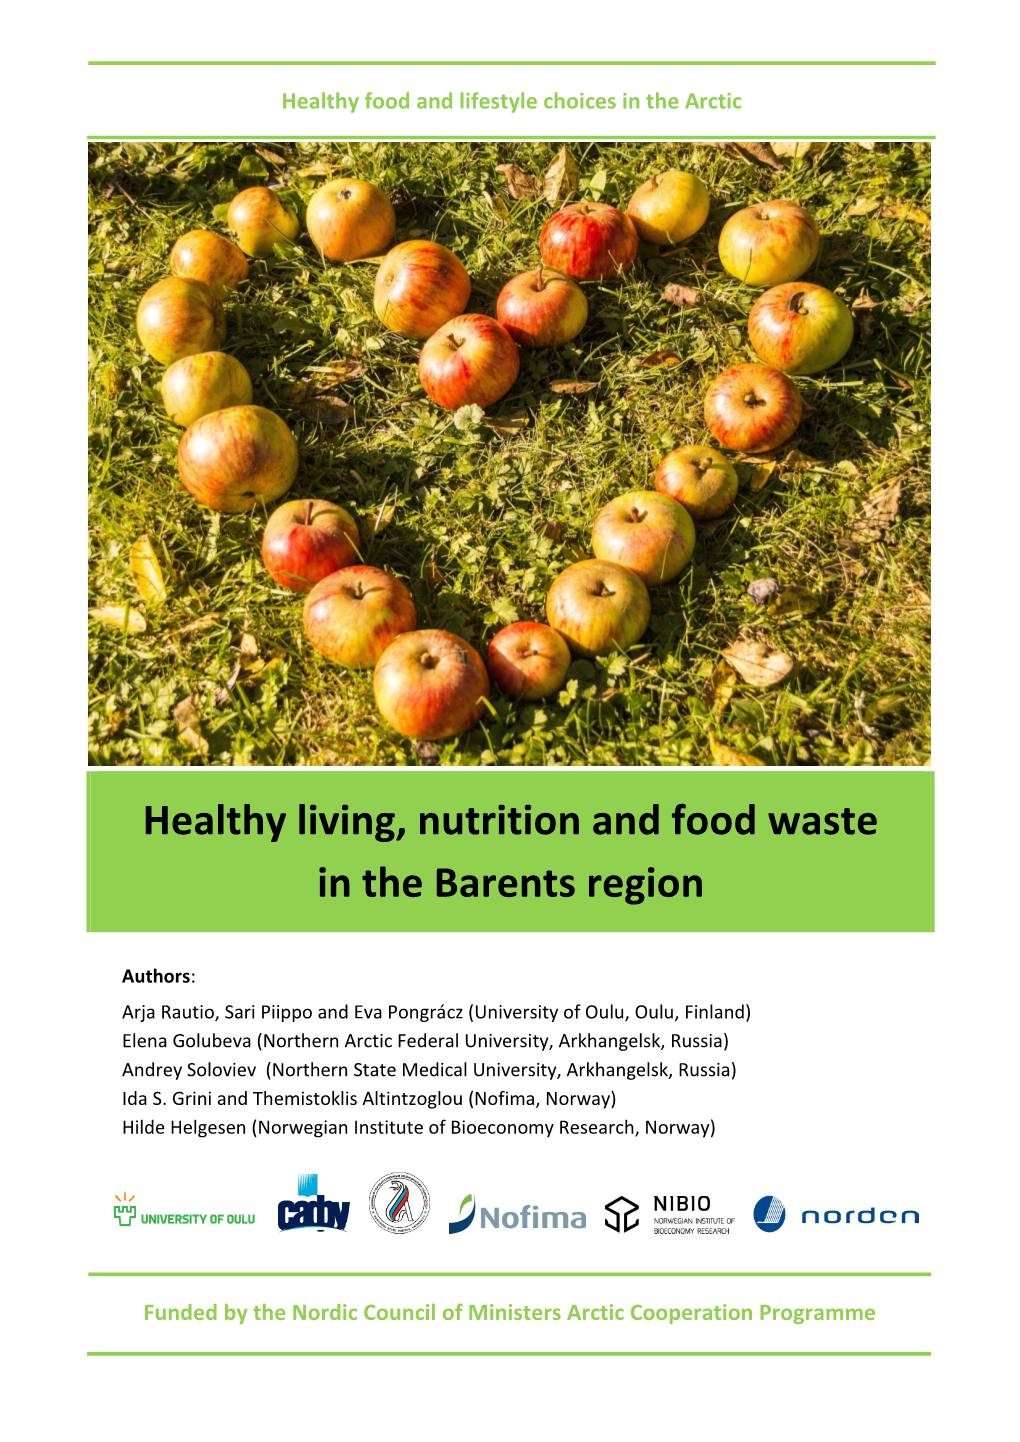 Healthy Living, Nutrition and Food Waste in the Barents Region